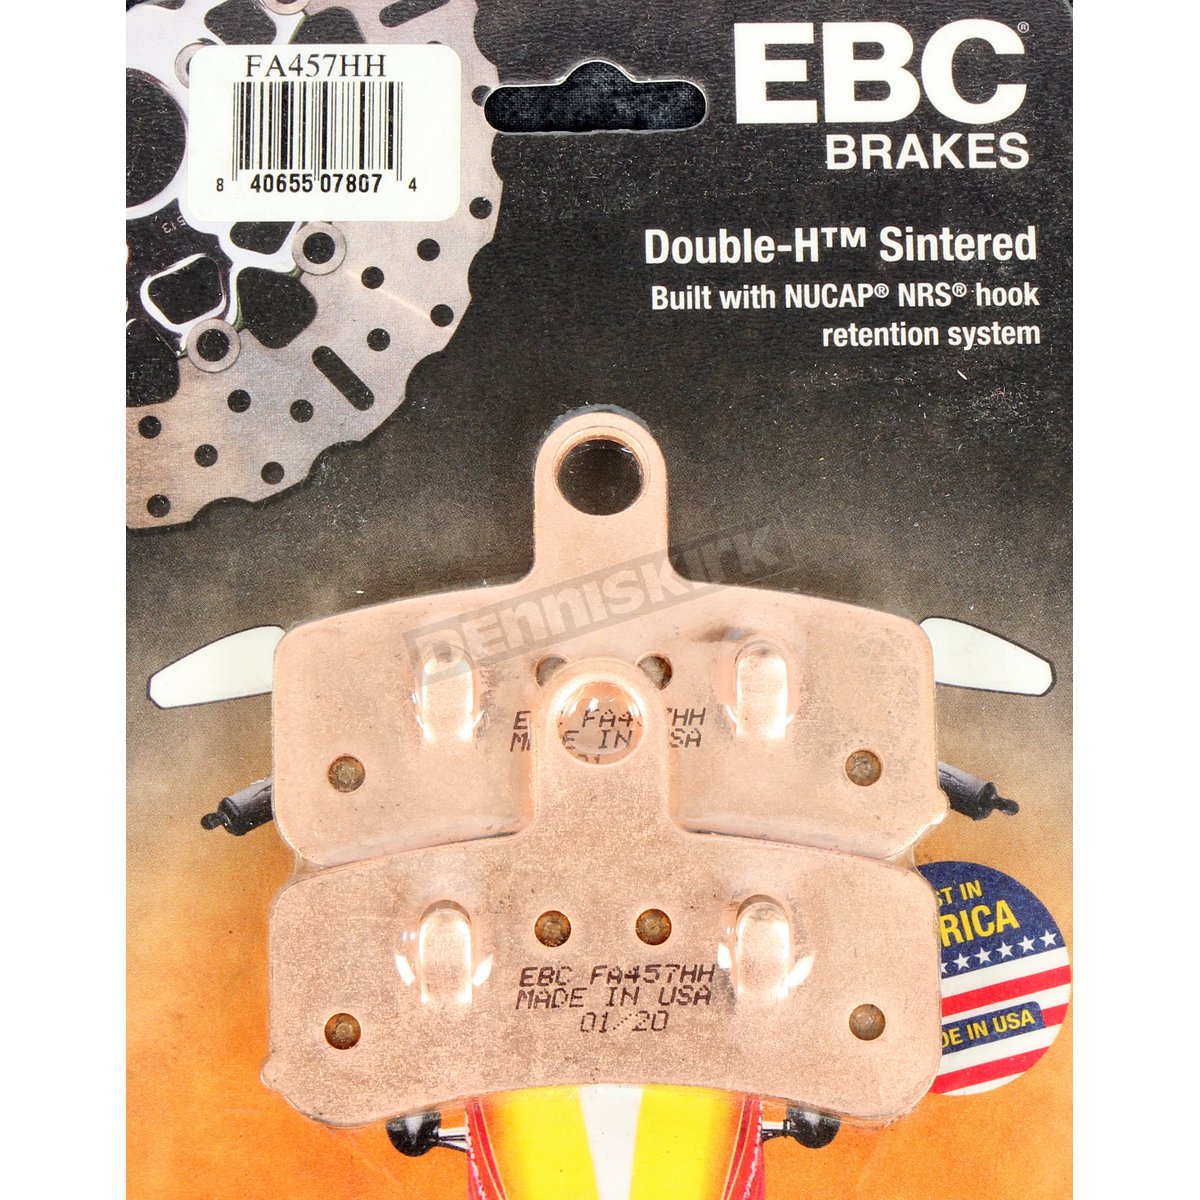 EBC Double FA457HH Sintered  Front Brake Pads Harley Dyna 08-17 Softail 08-14